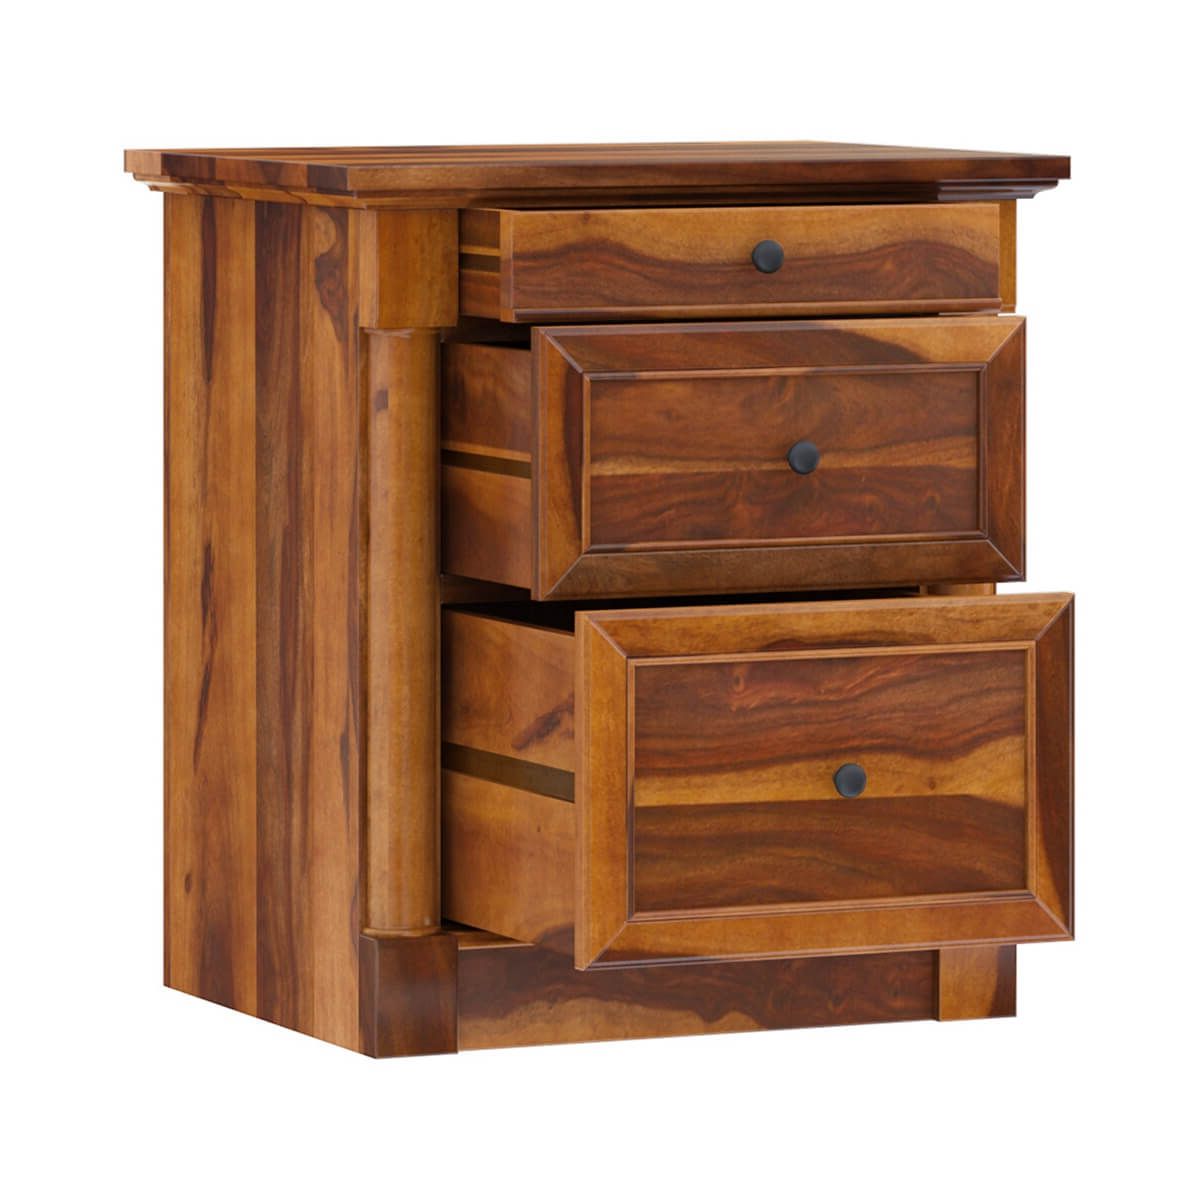 2020 Ansonville Rustic Solid Wood 3 Drawer File Cabinet In Wood Cabinet With Drawers (View 12 of 15)